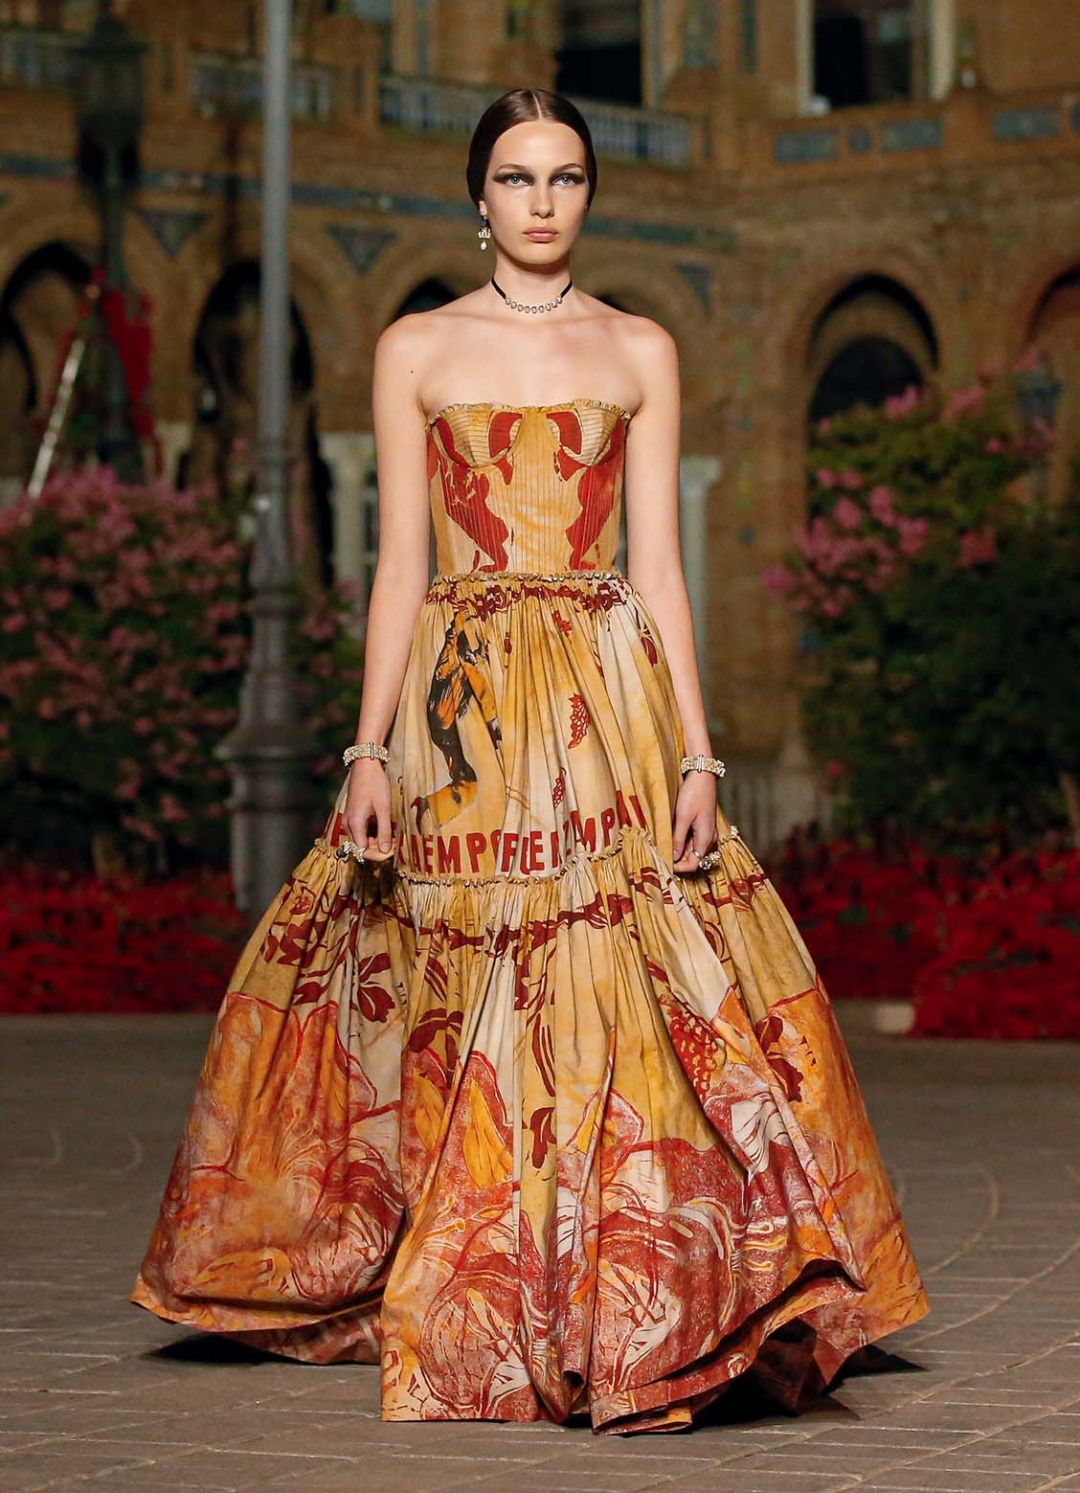 Dress with prints by María Ángeles Vila for the Dior ‘Cruise 2023’ fashion show in Seville